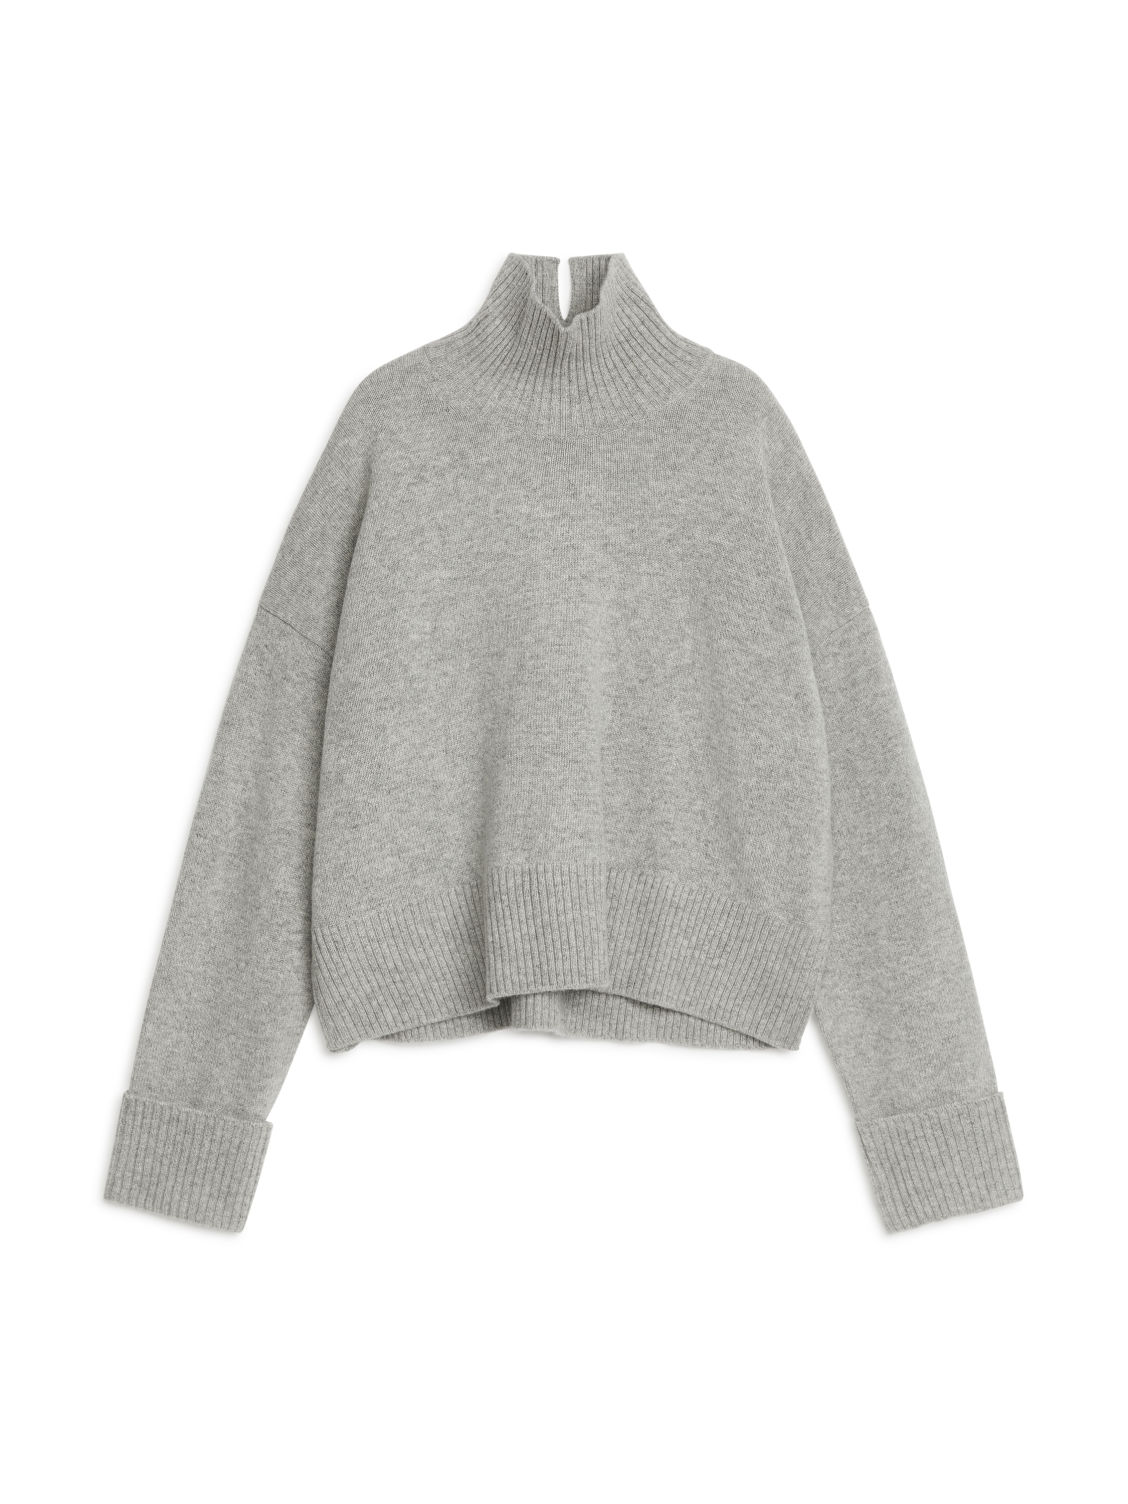 Best High-Street Knitwear: 21 Expensive-Looking Pieces | Who What Wear UK